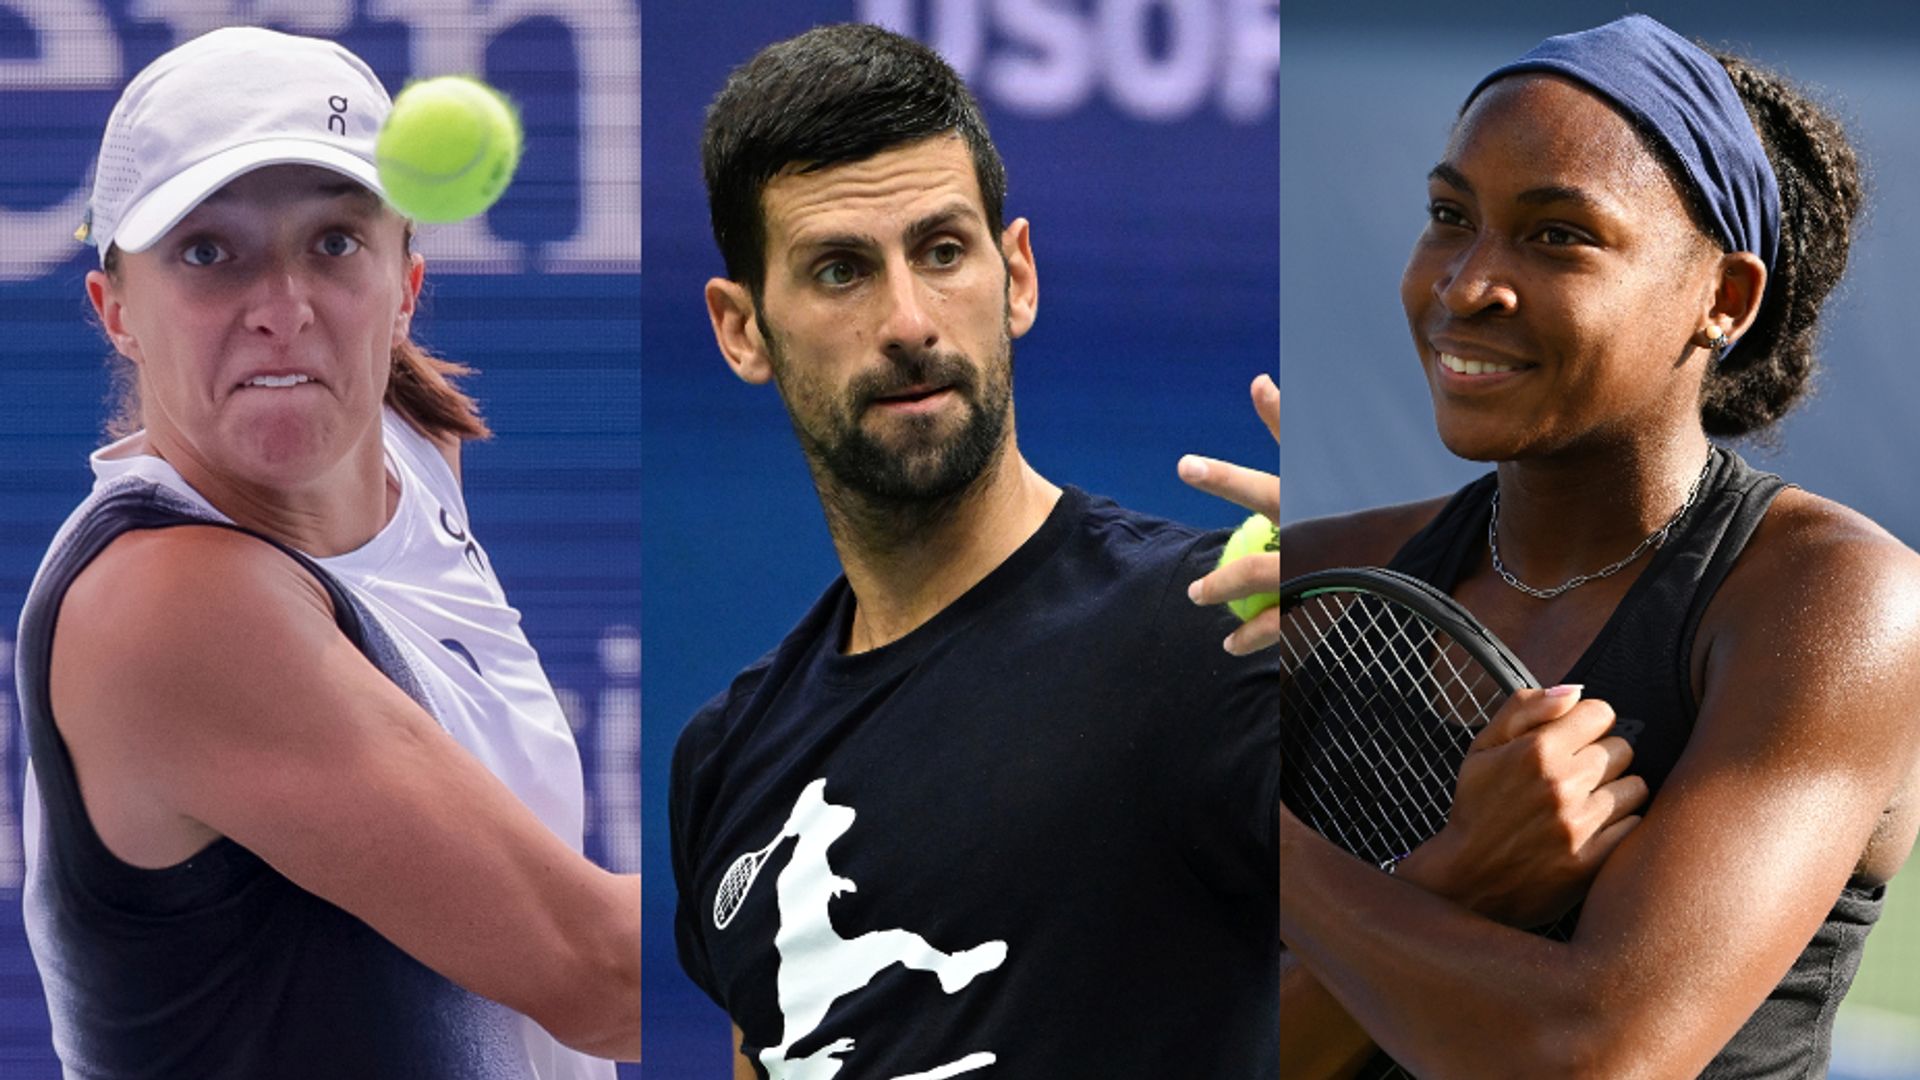 US Open Day Three LIVE! Djokovic in action after Gauff wins in style